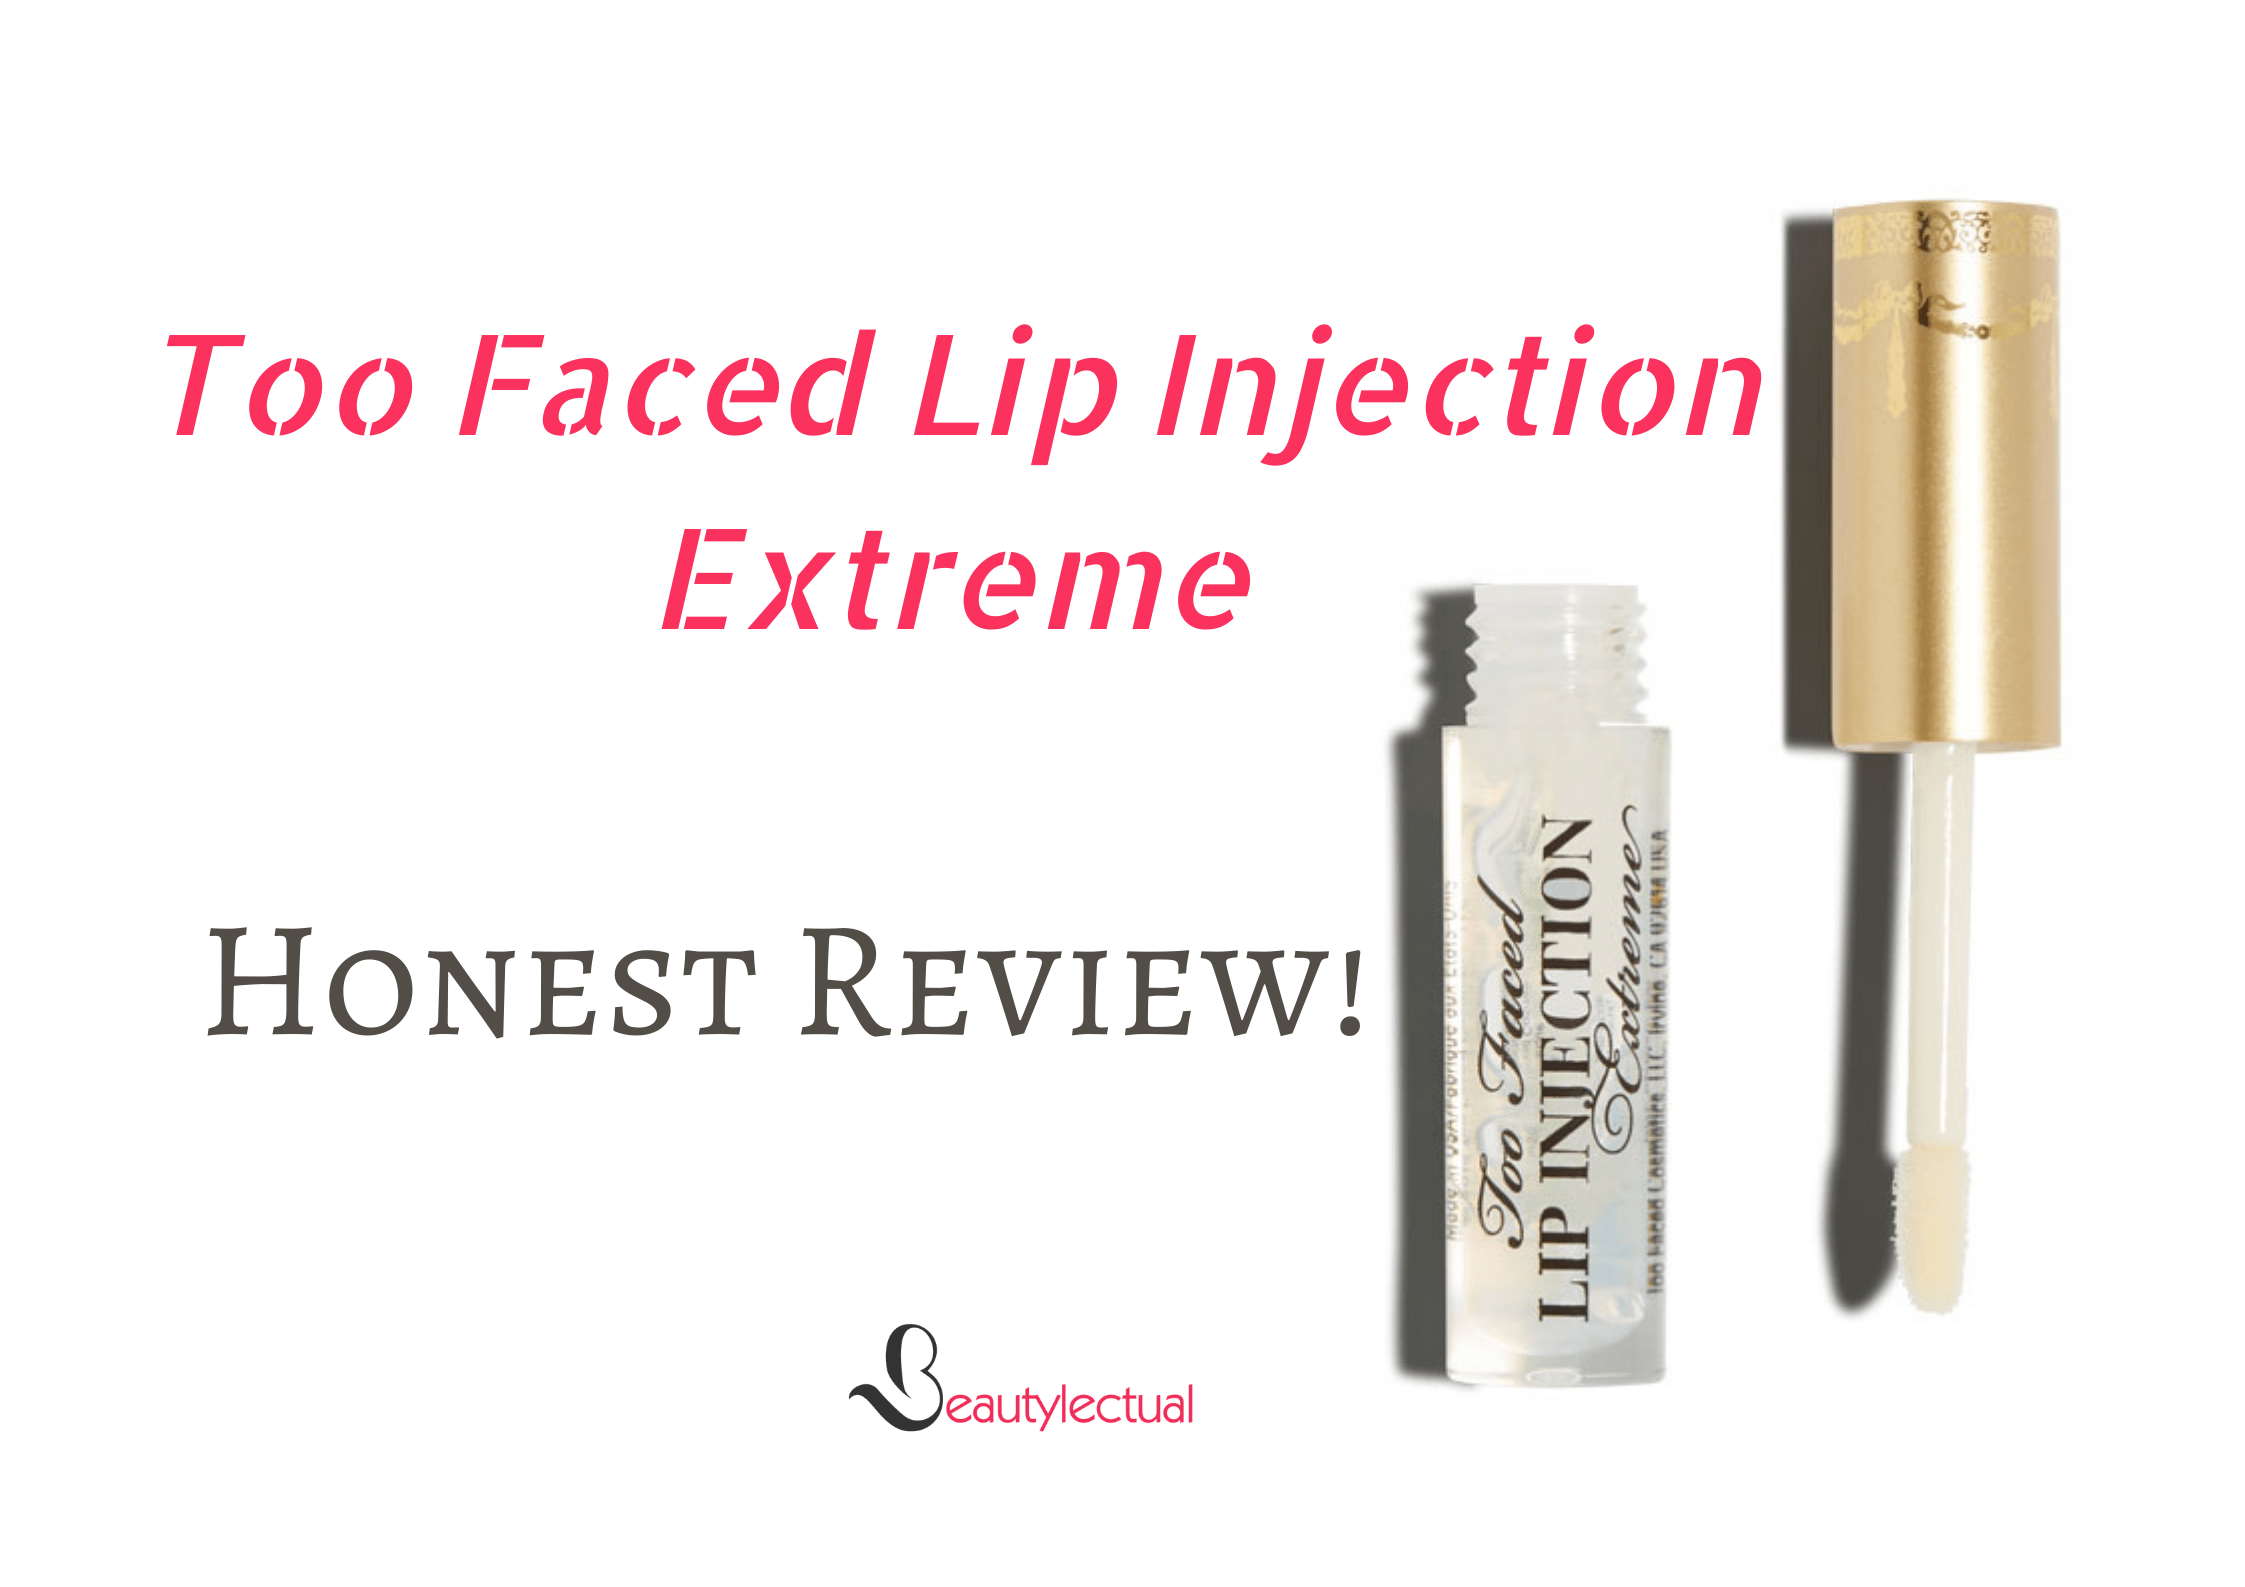 Too-Faced-Lip-Injection-Extreme-Reviews